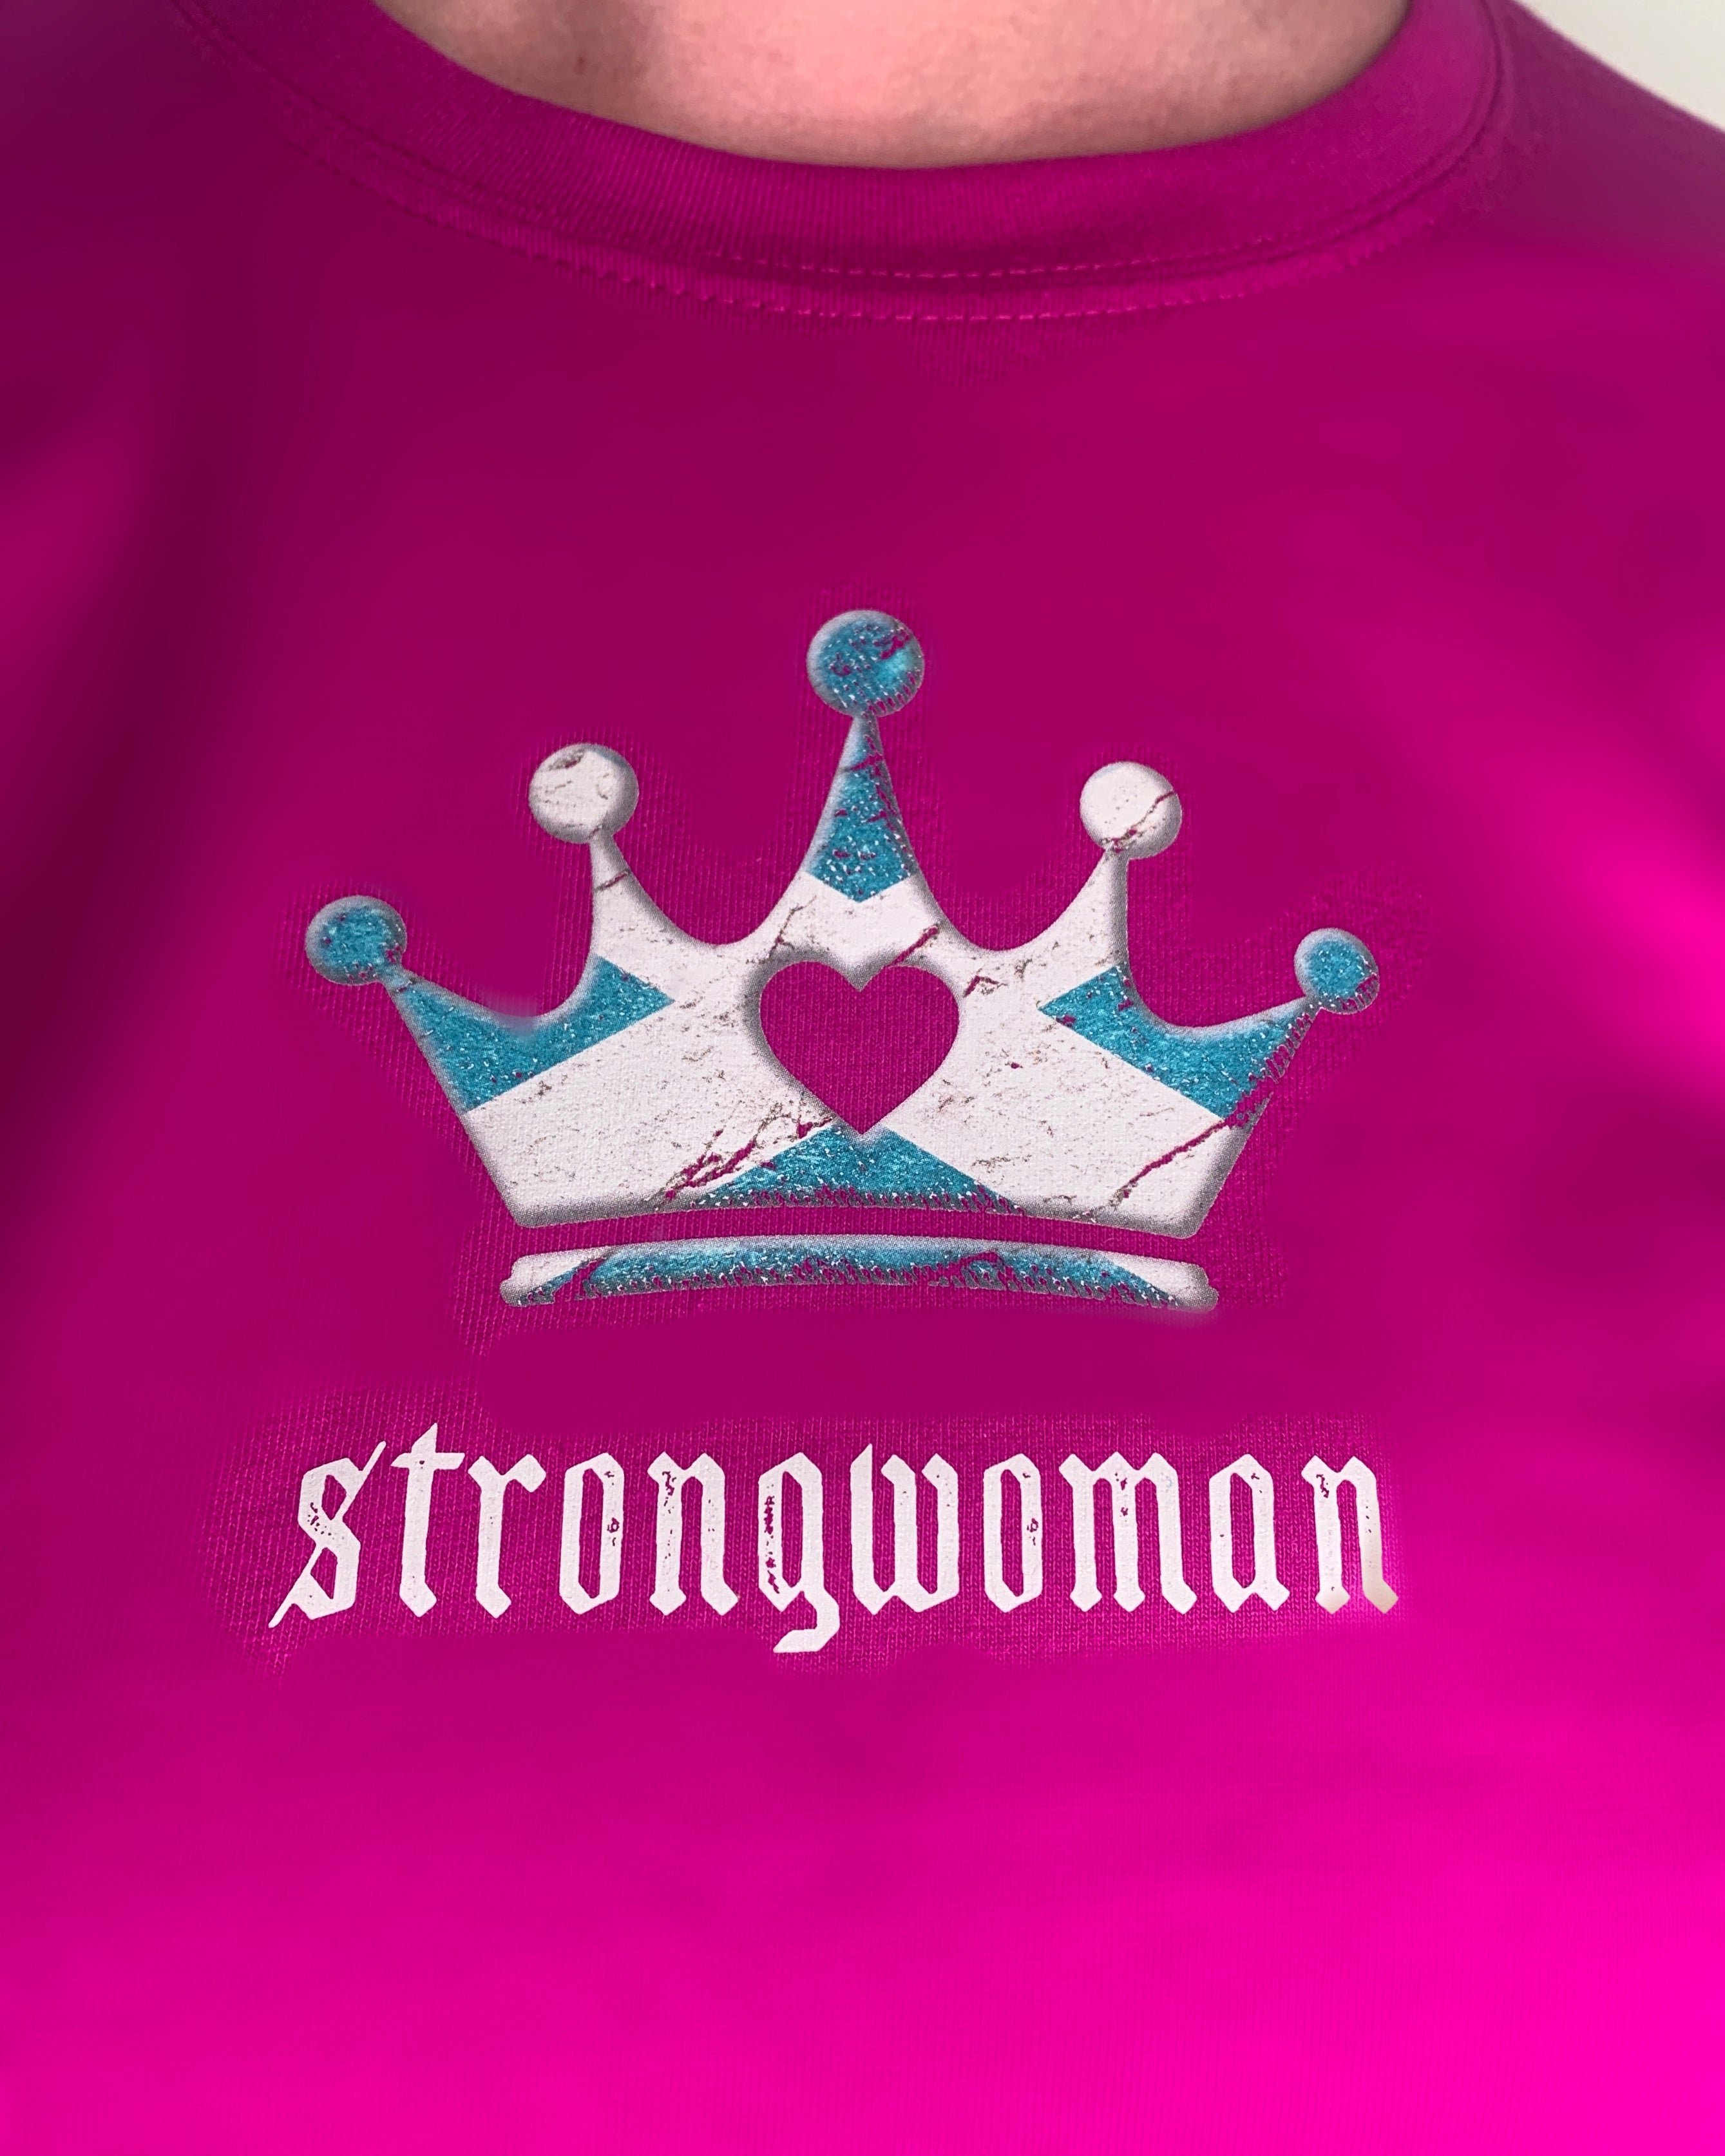 Scottish Strongwoman on Pink Unisex Tee - Cleekers